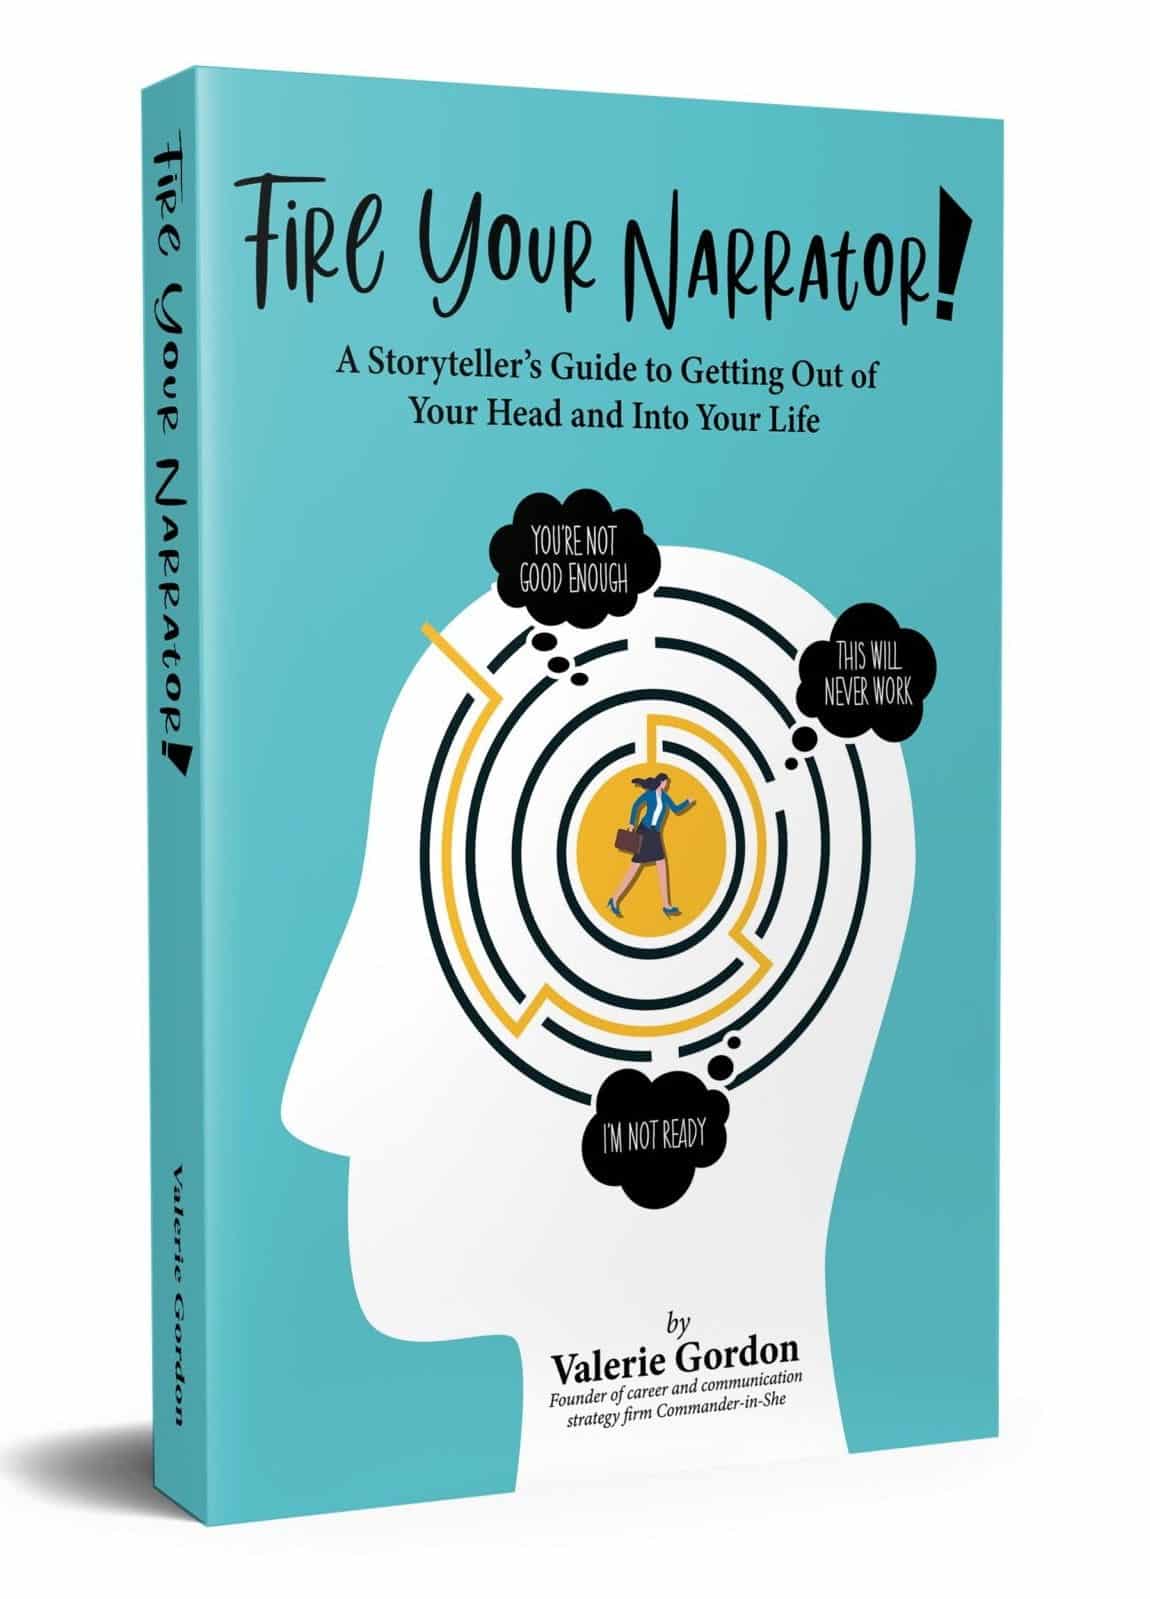 Fire your narrator by valerie gordon